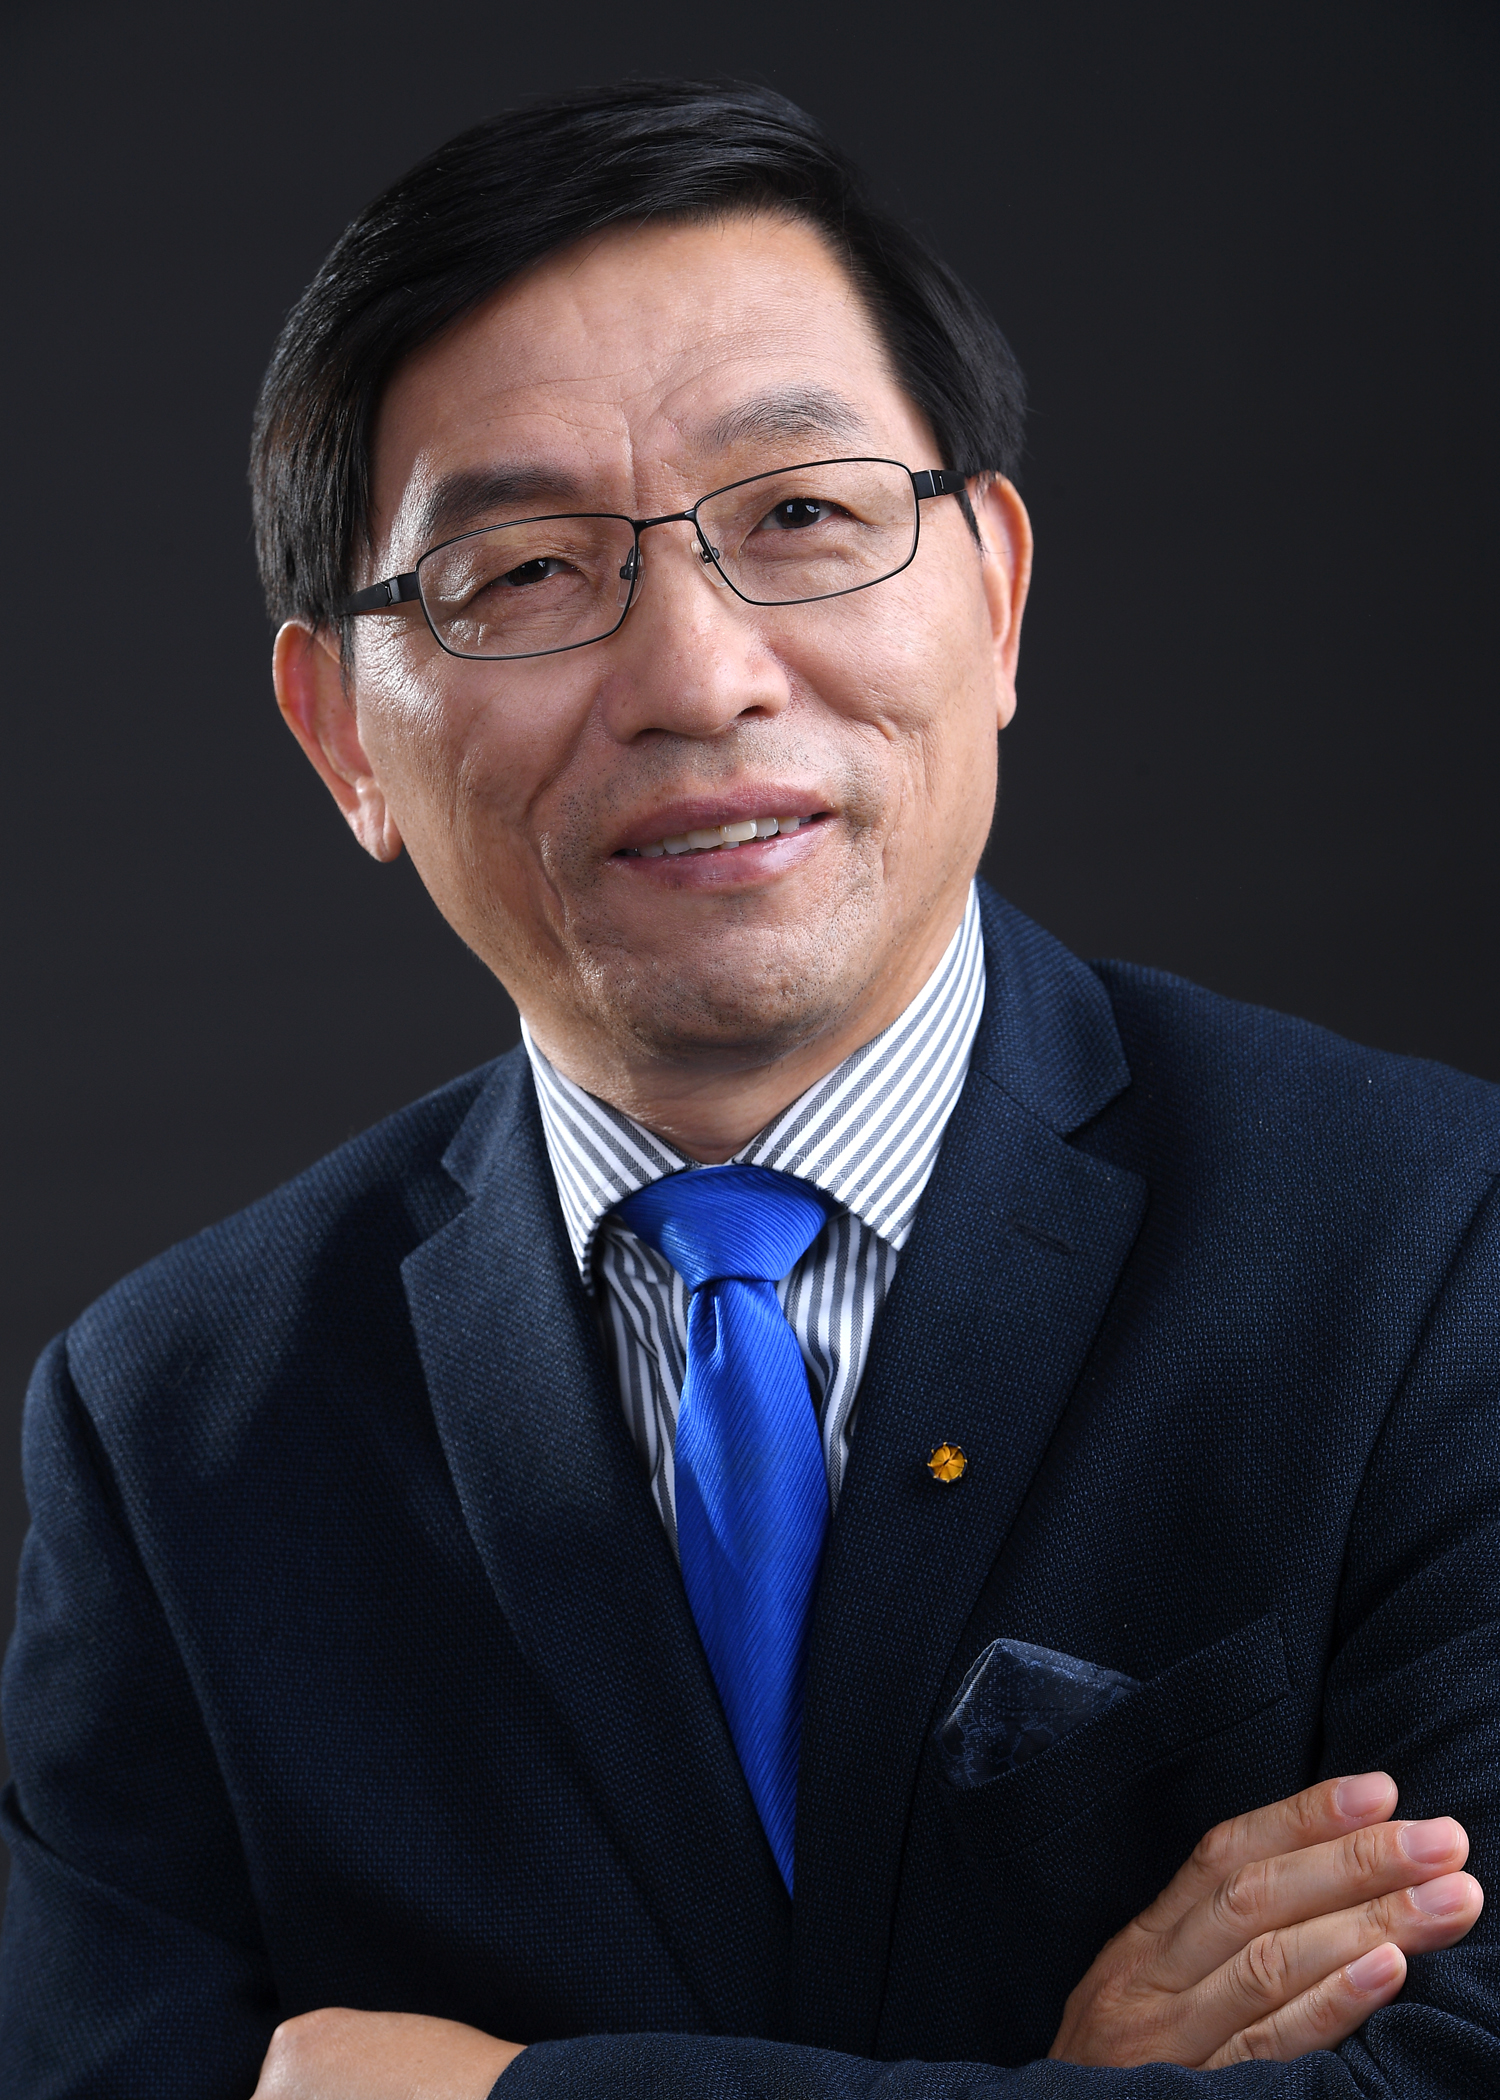 Dr. Zhanqing Li crosses his arms, wearing a suit with a blue tie.